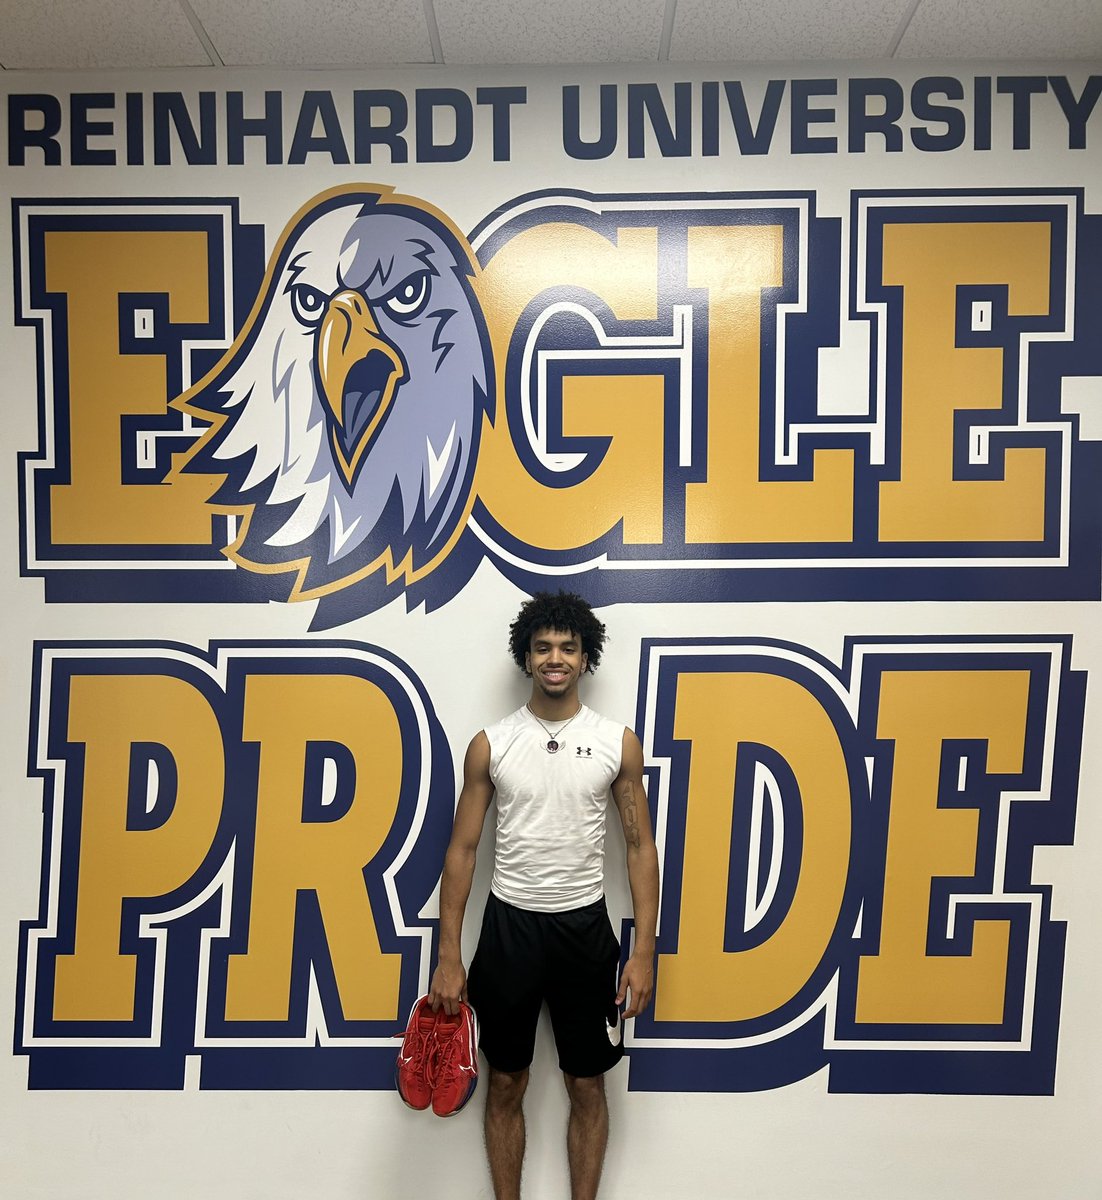 After a great workout and visit, I’m happy to receive an offer from Reinhardt University @jnewton0729 ! GO EAGLES !!